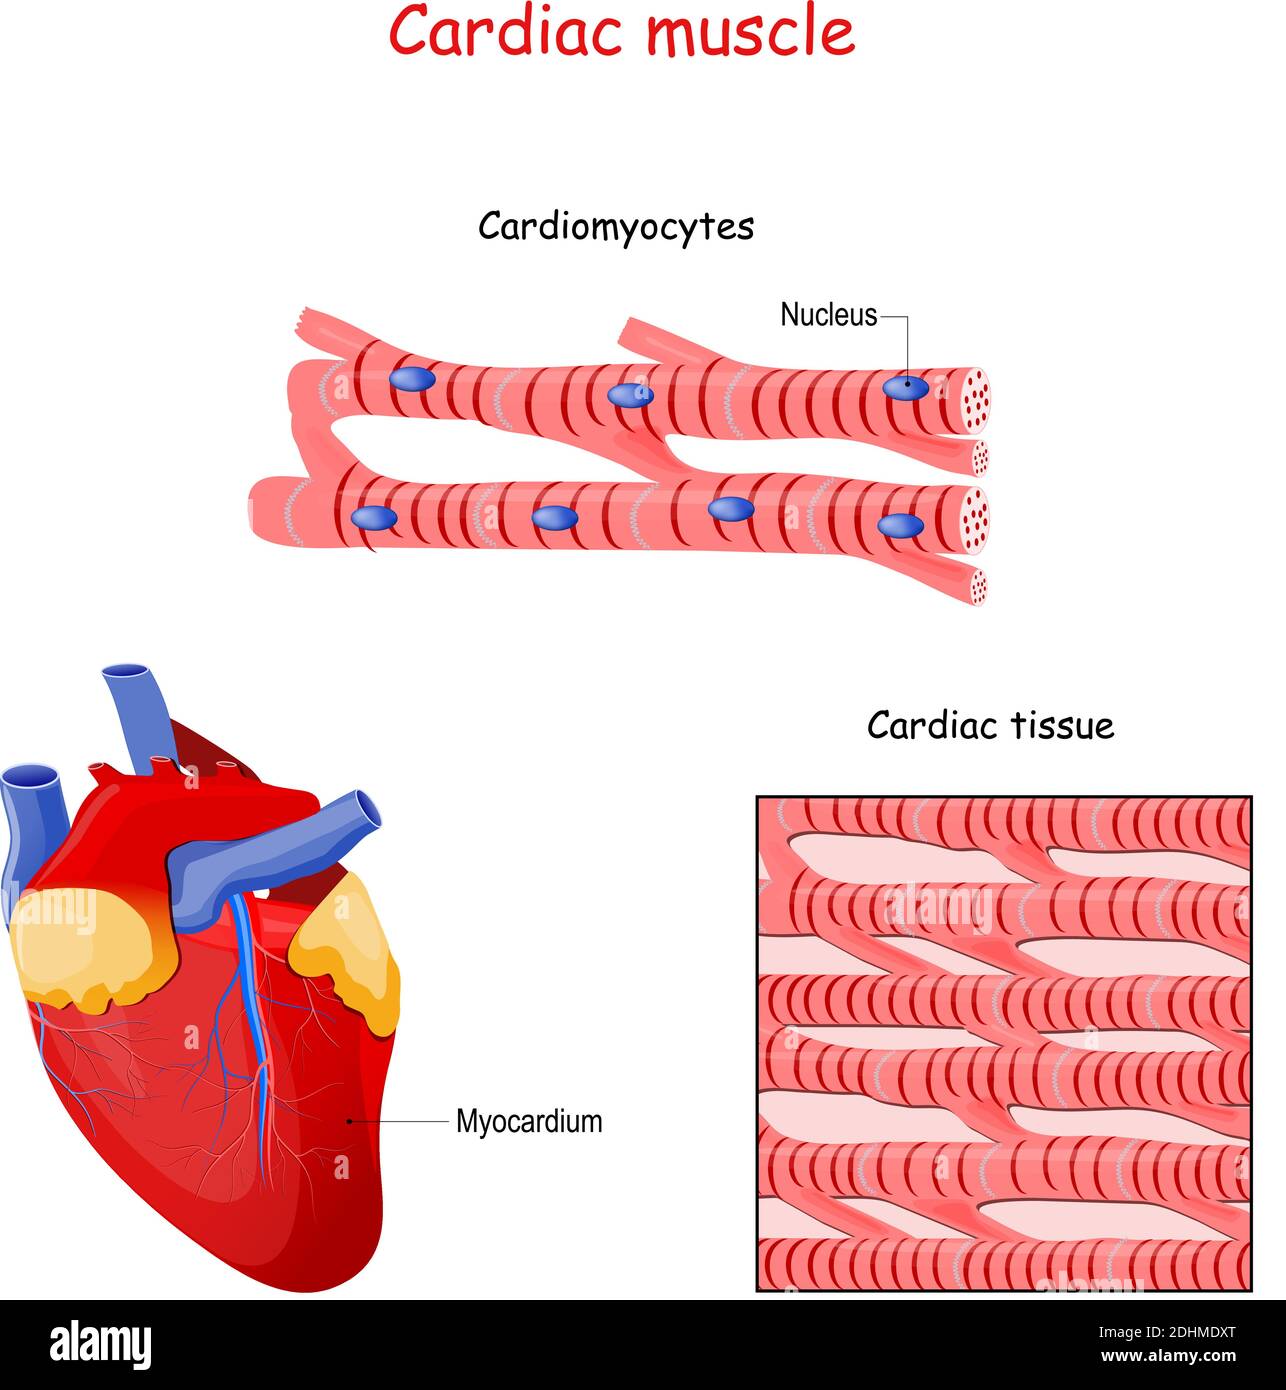 Structure of Cardiac muscle fibers. anatomy of cardiomyocyte. Background of heart muscle tissue. Set of vectors illustrations Stock Vector